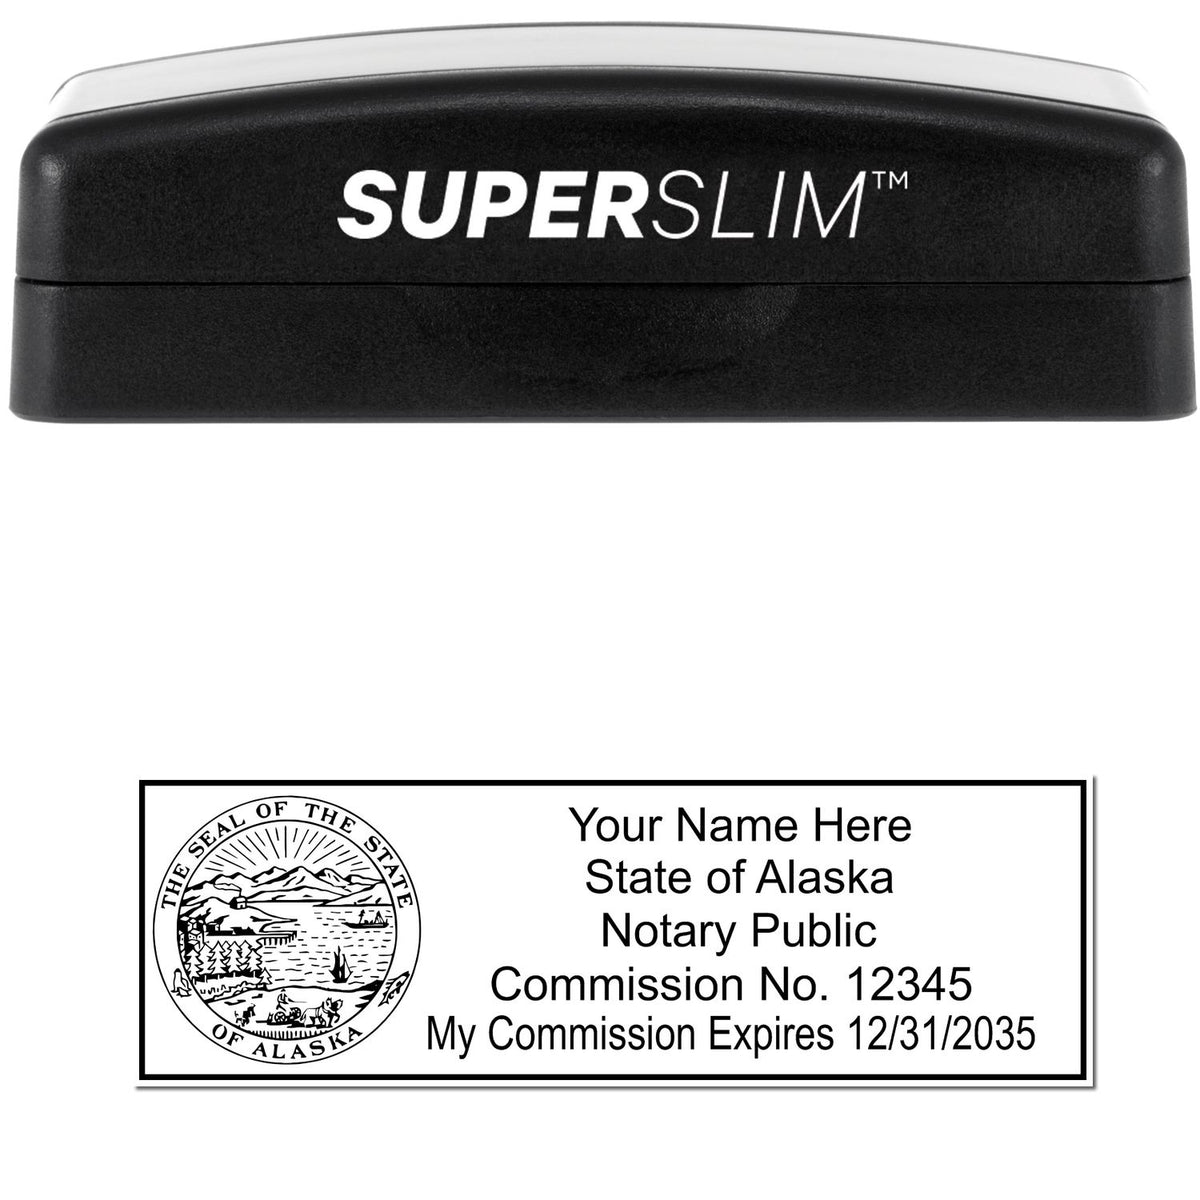 The main image for the Super Slim Alaska Notary Public Stamp depicting a sample of the imprint and electronic files